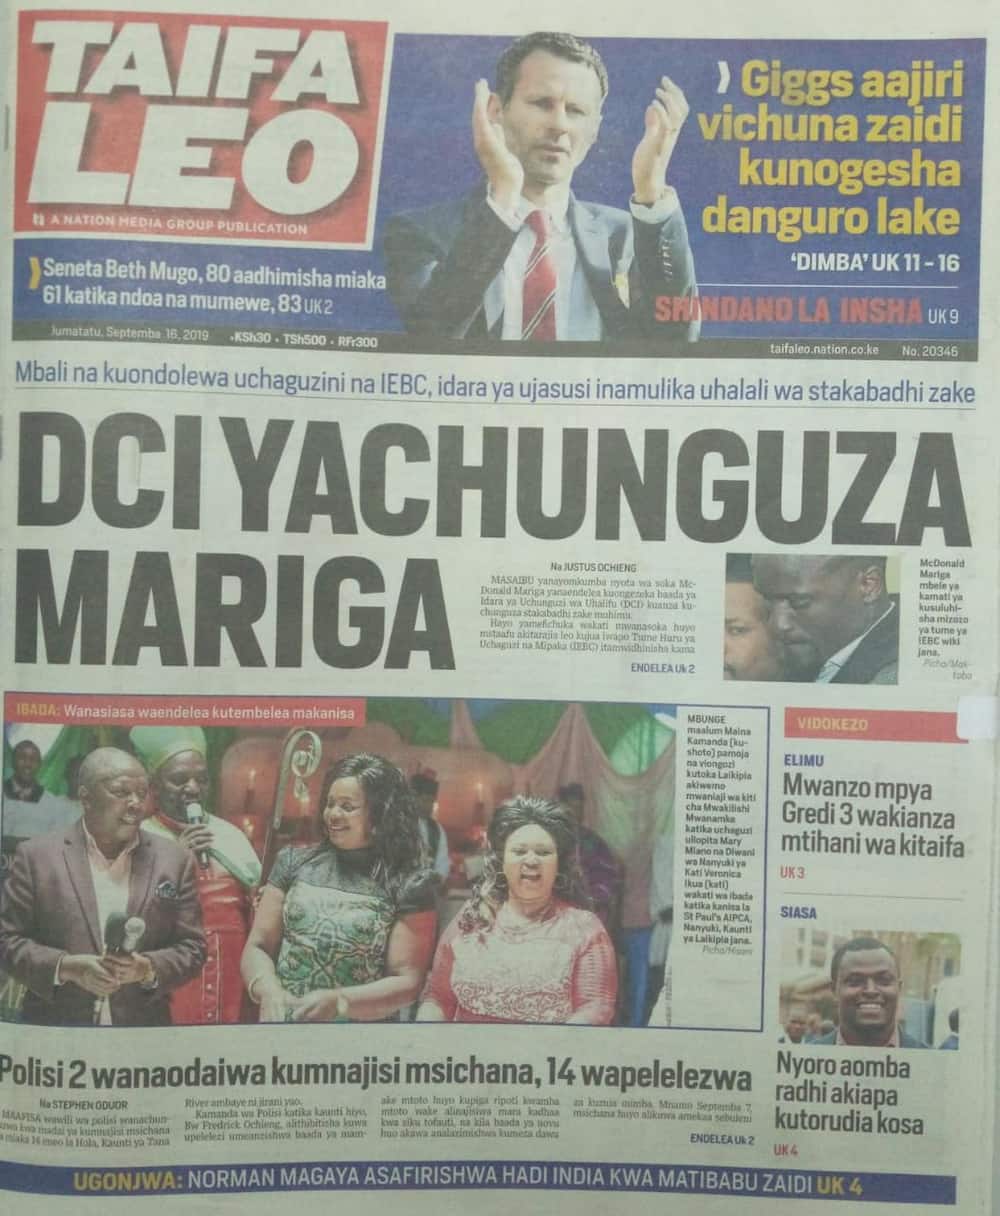 Kenyan newspapers review for September 16: ANC MP Ayub Savula says Kibra seat winner will determine Luhya presidential choice in 2022